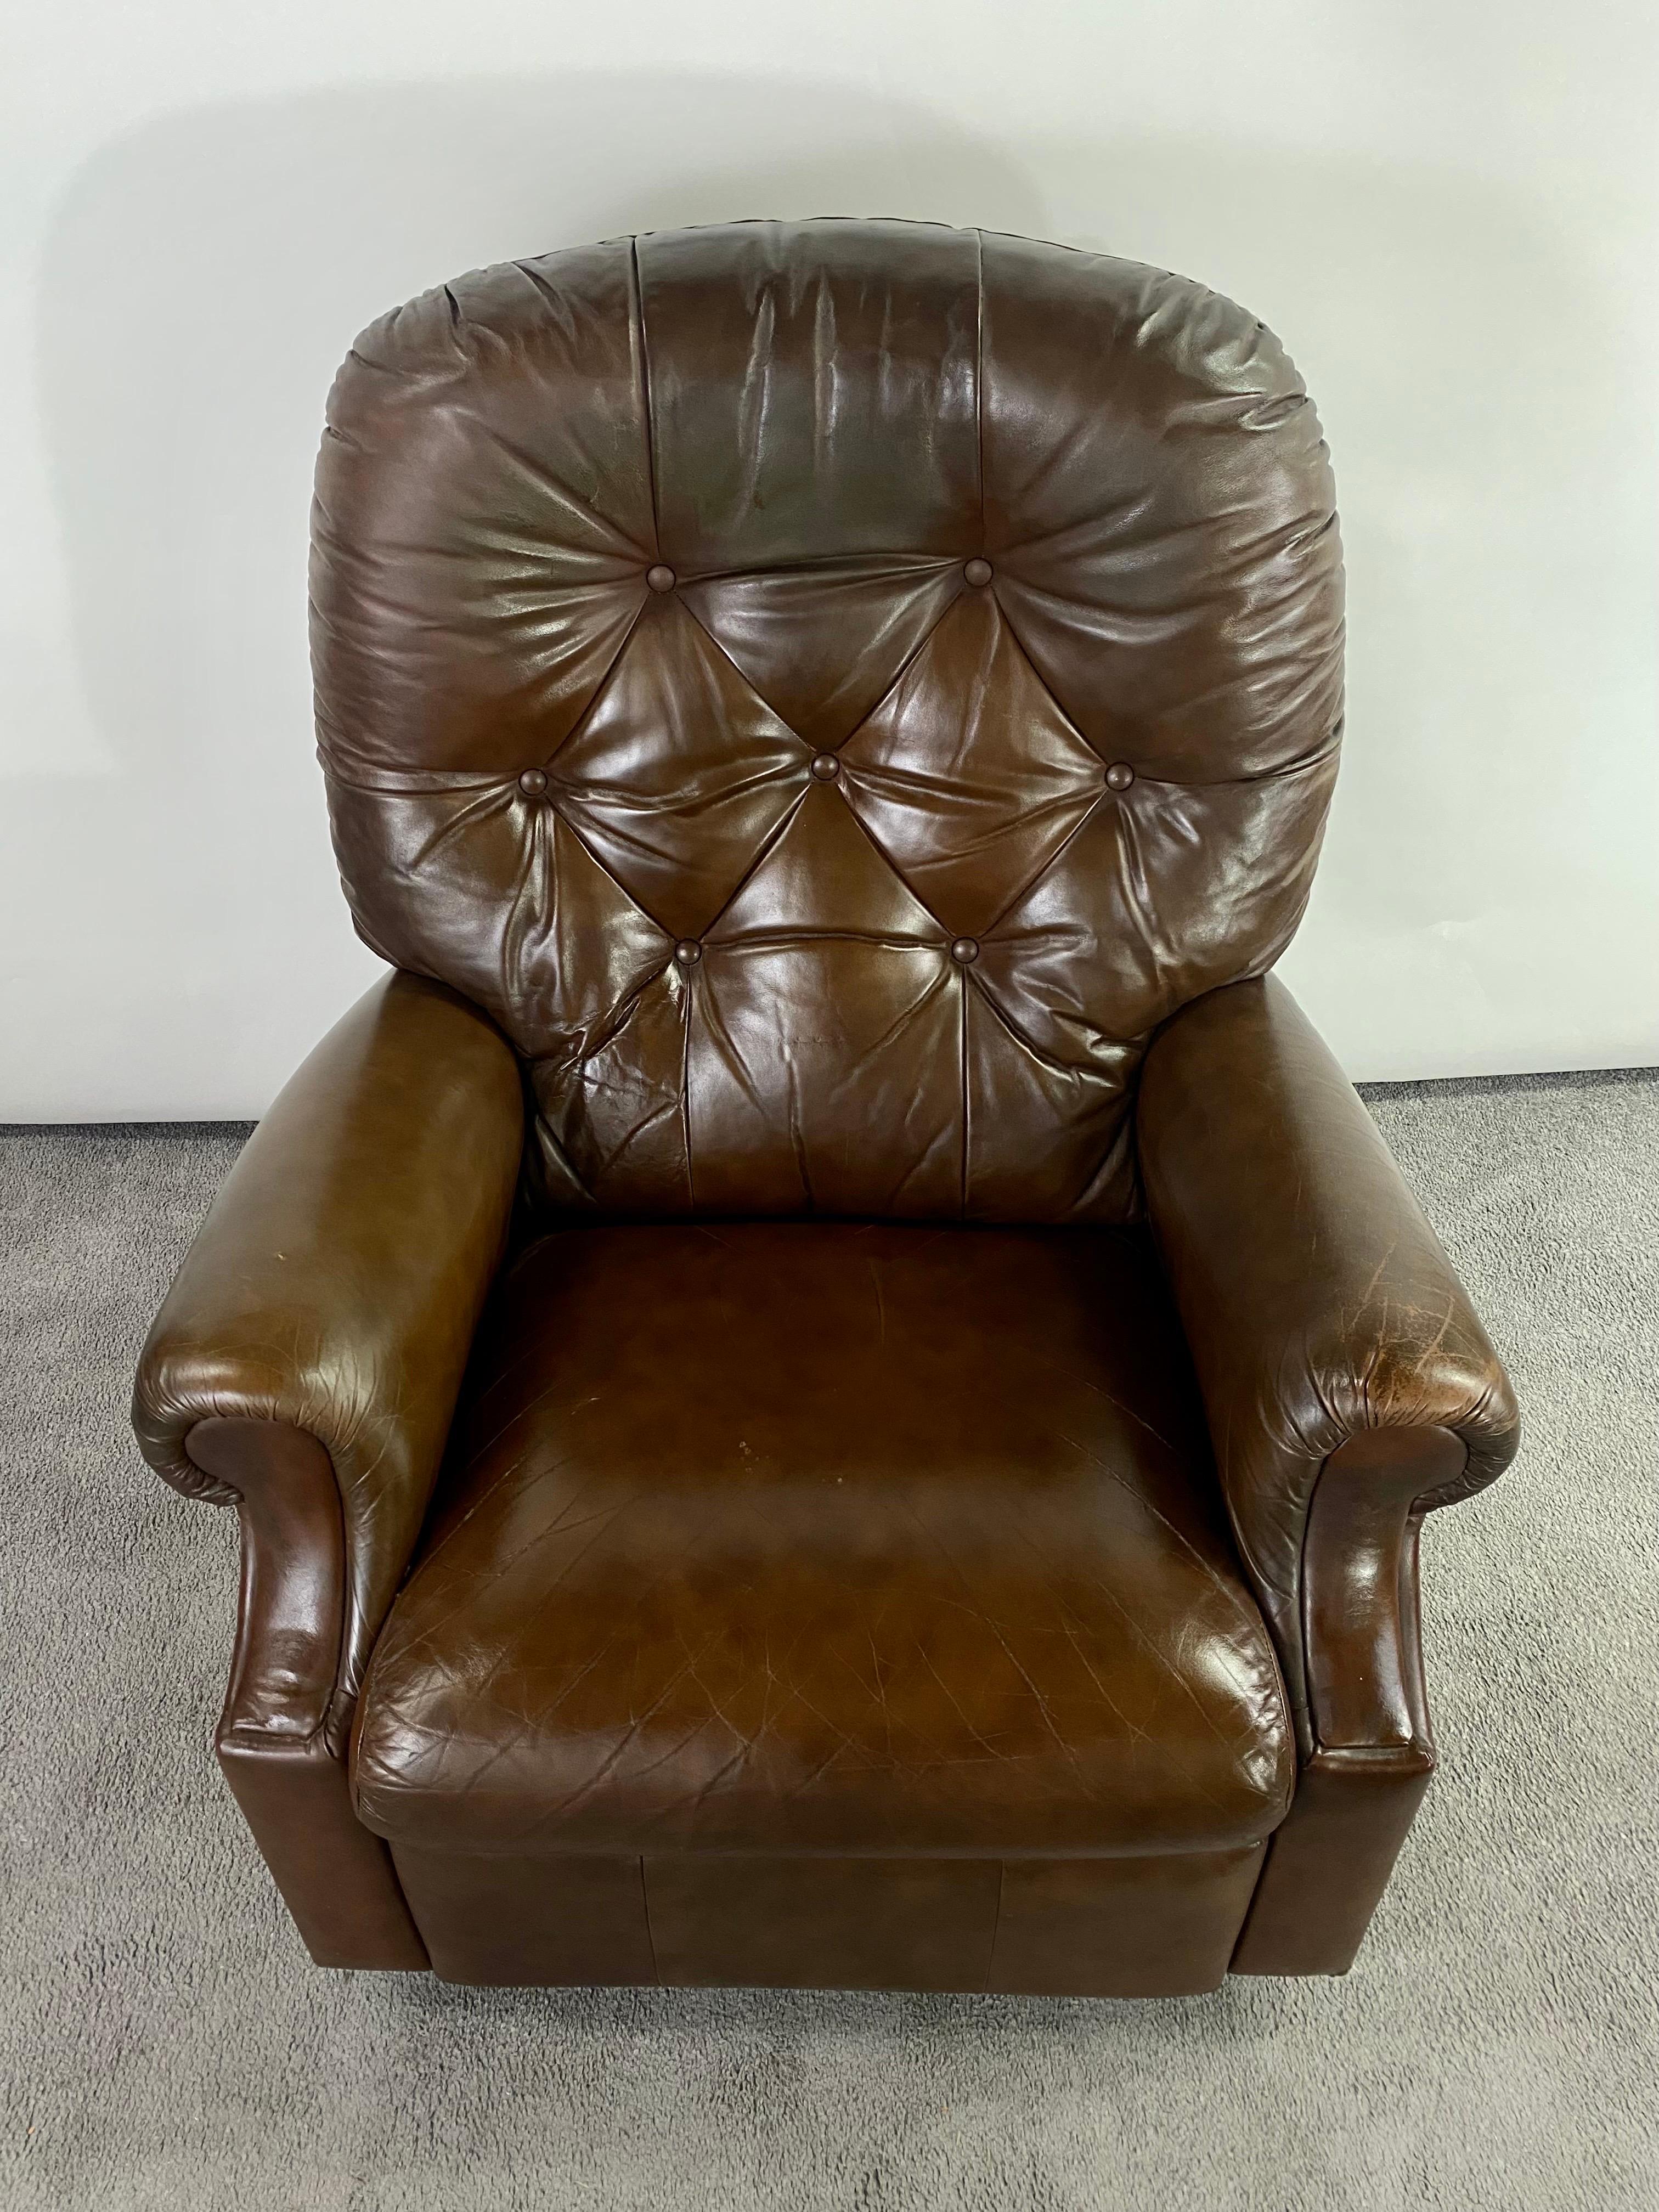 A Chesterfield style brown genuine leather Lazy boy reclining club chair. The classic and elegant club chair features tufted design and made of high quality brown leather.  The club chair converts to a recliner for additional comfort.  The leather